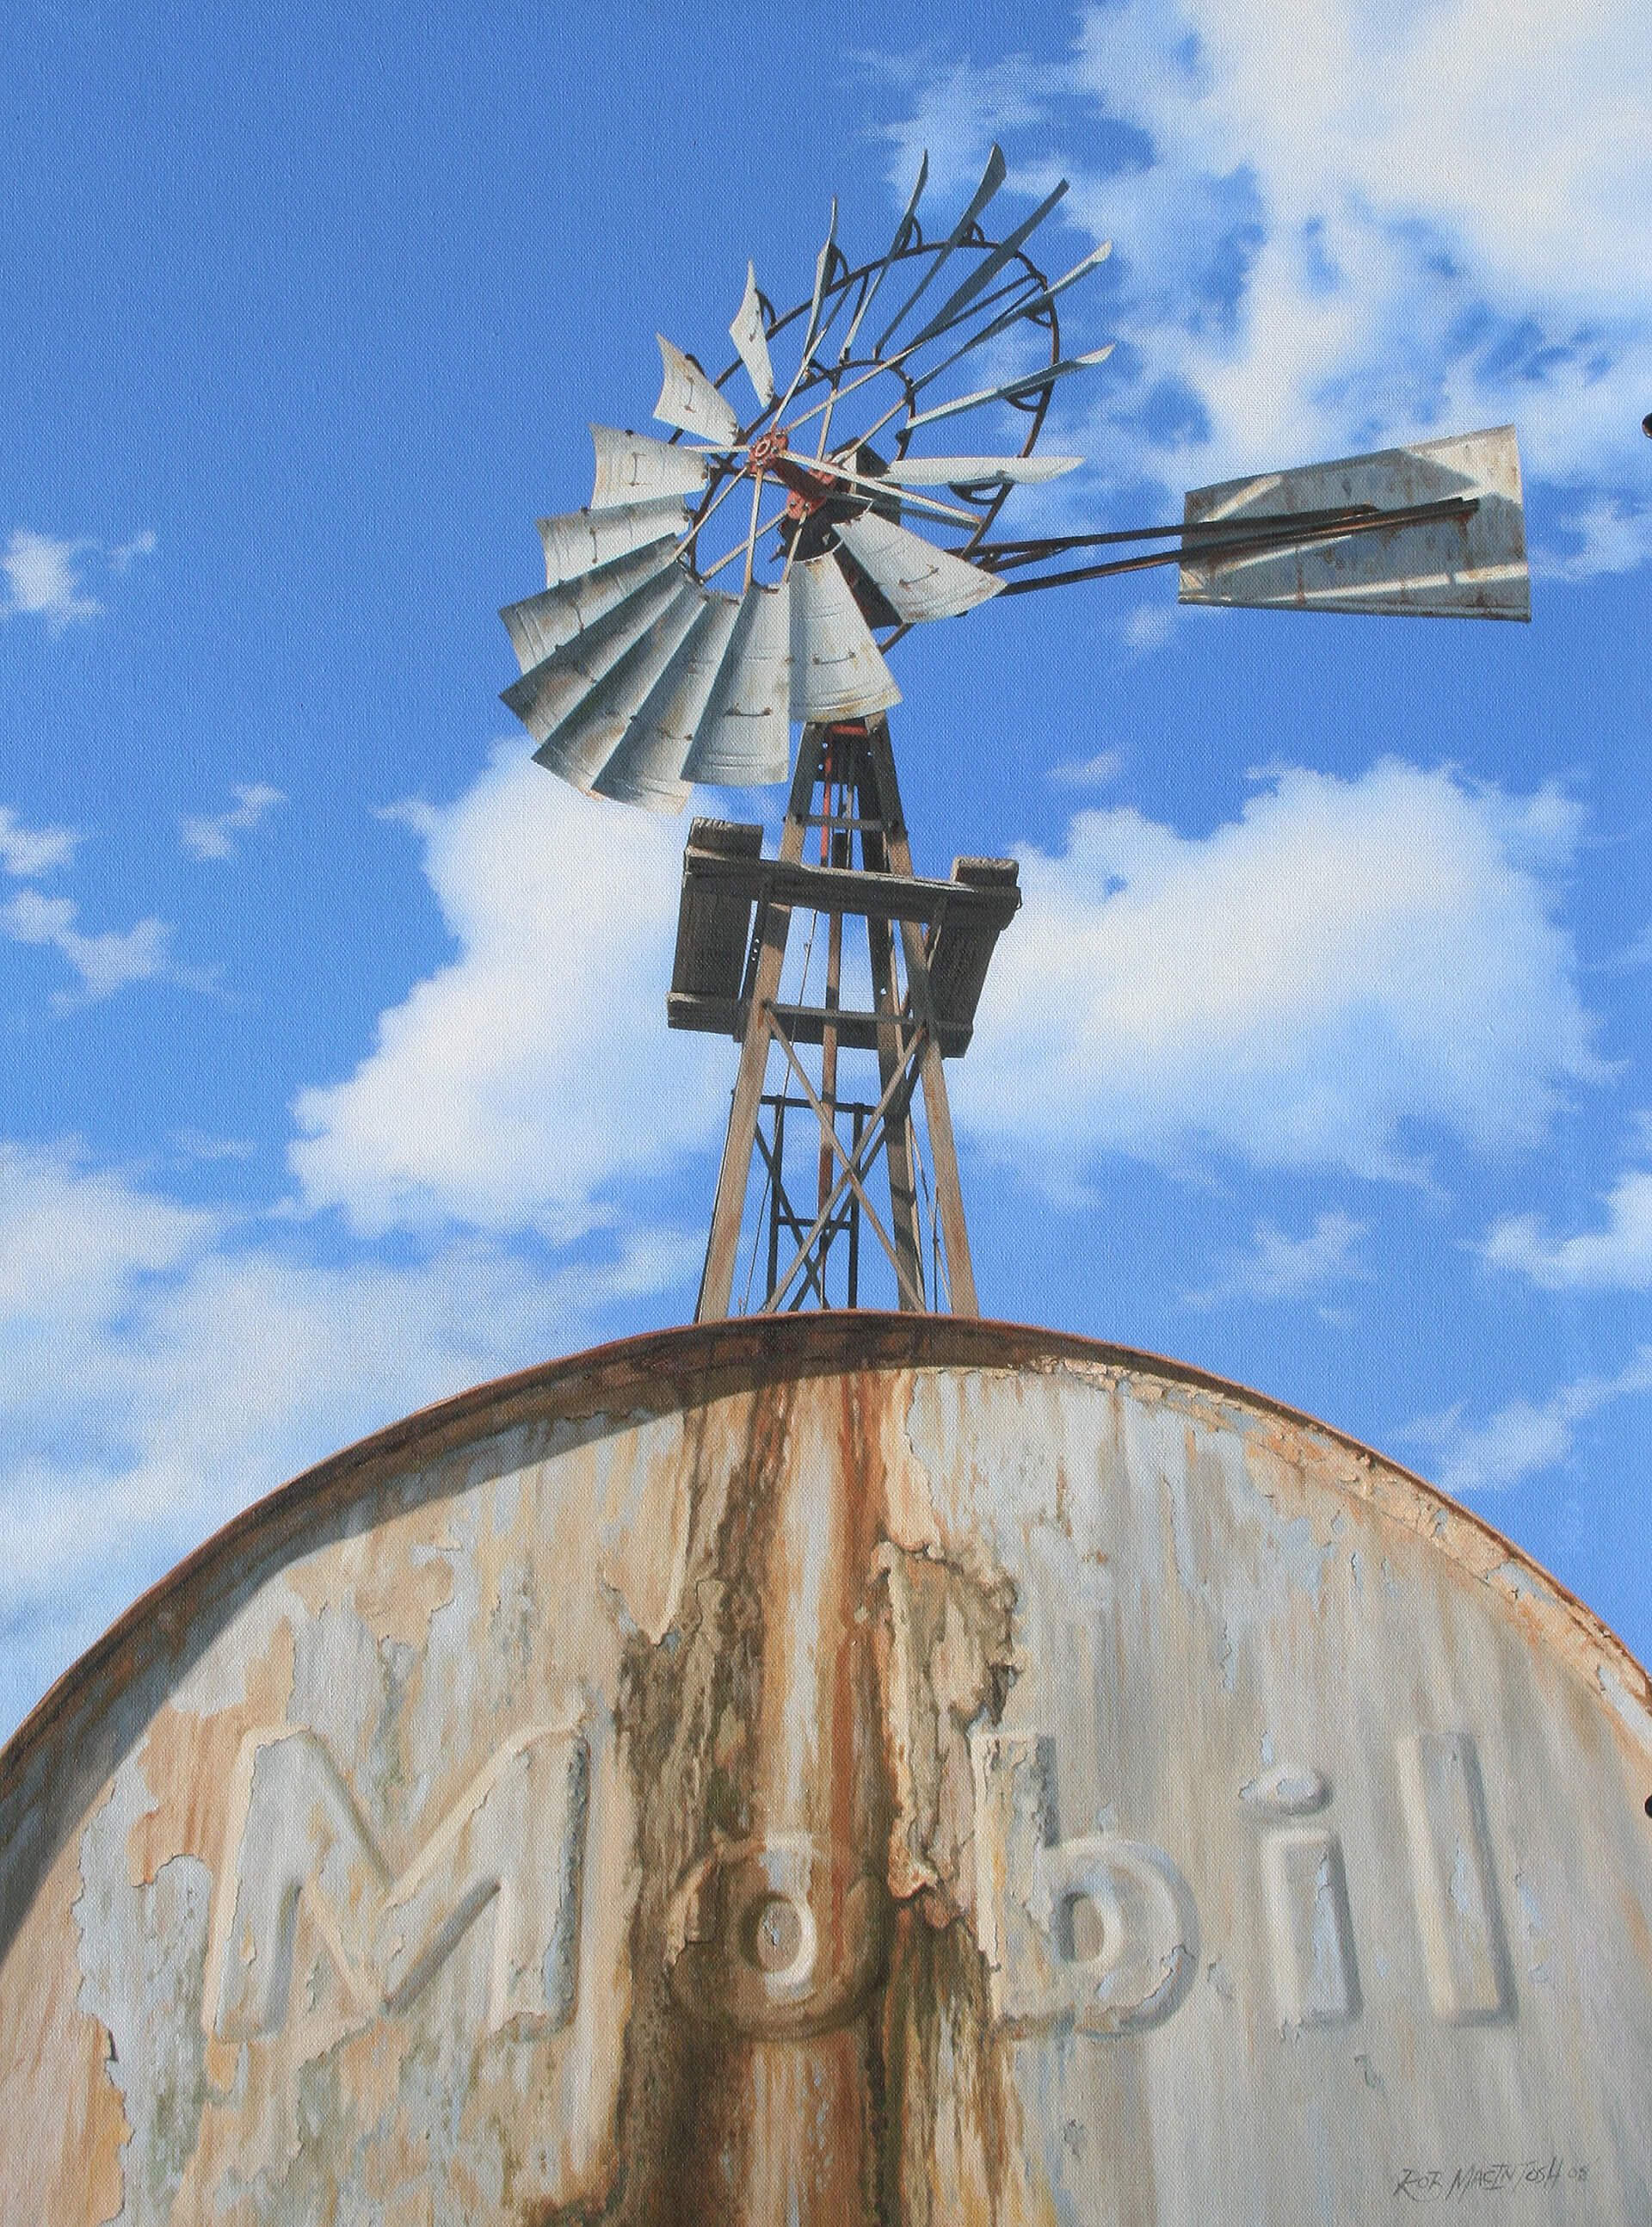 Photorealistic painting of an old windmill against a blue sky